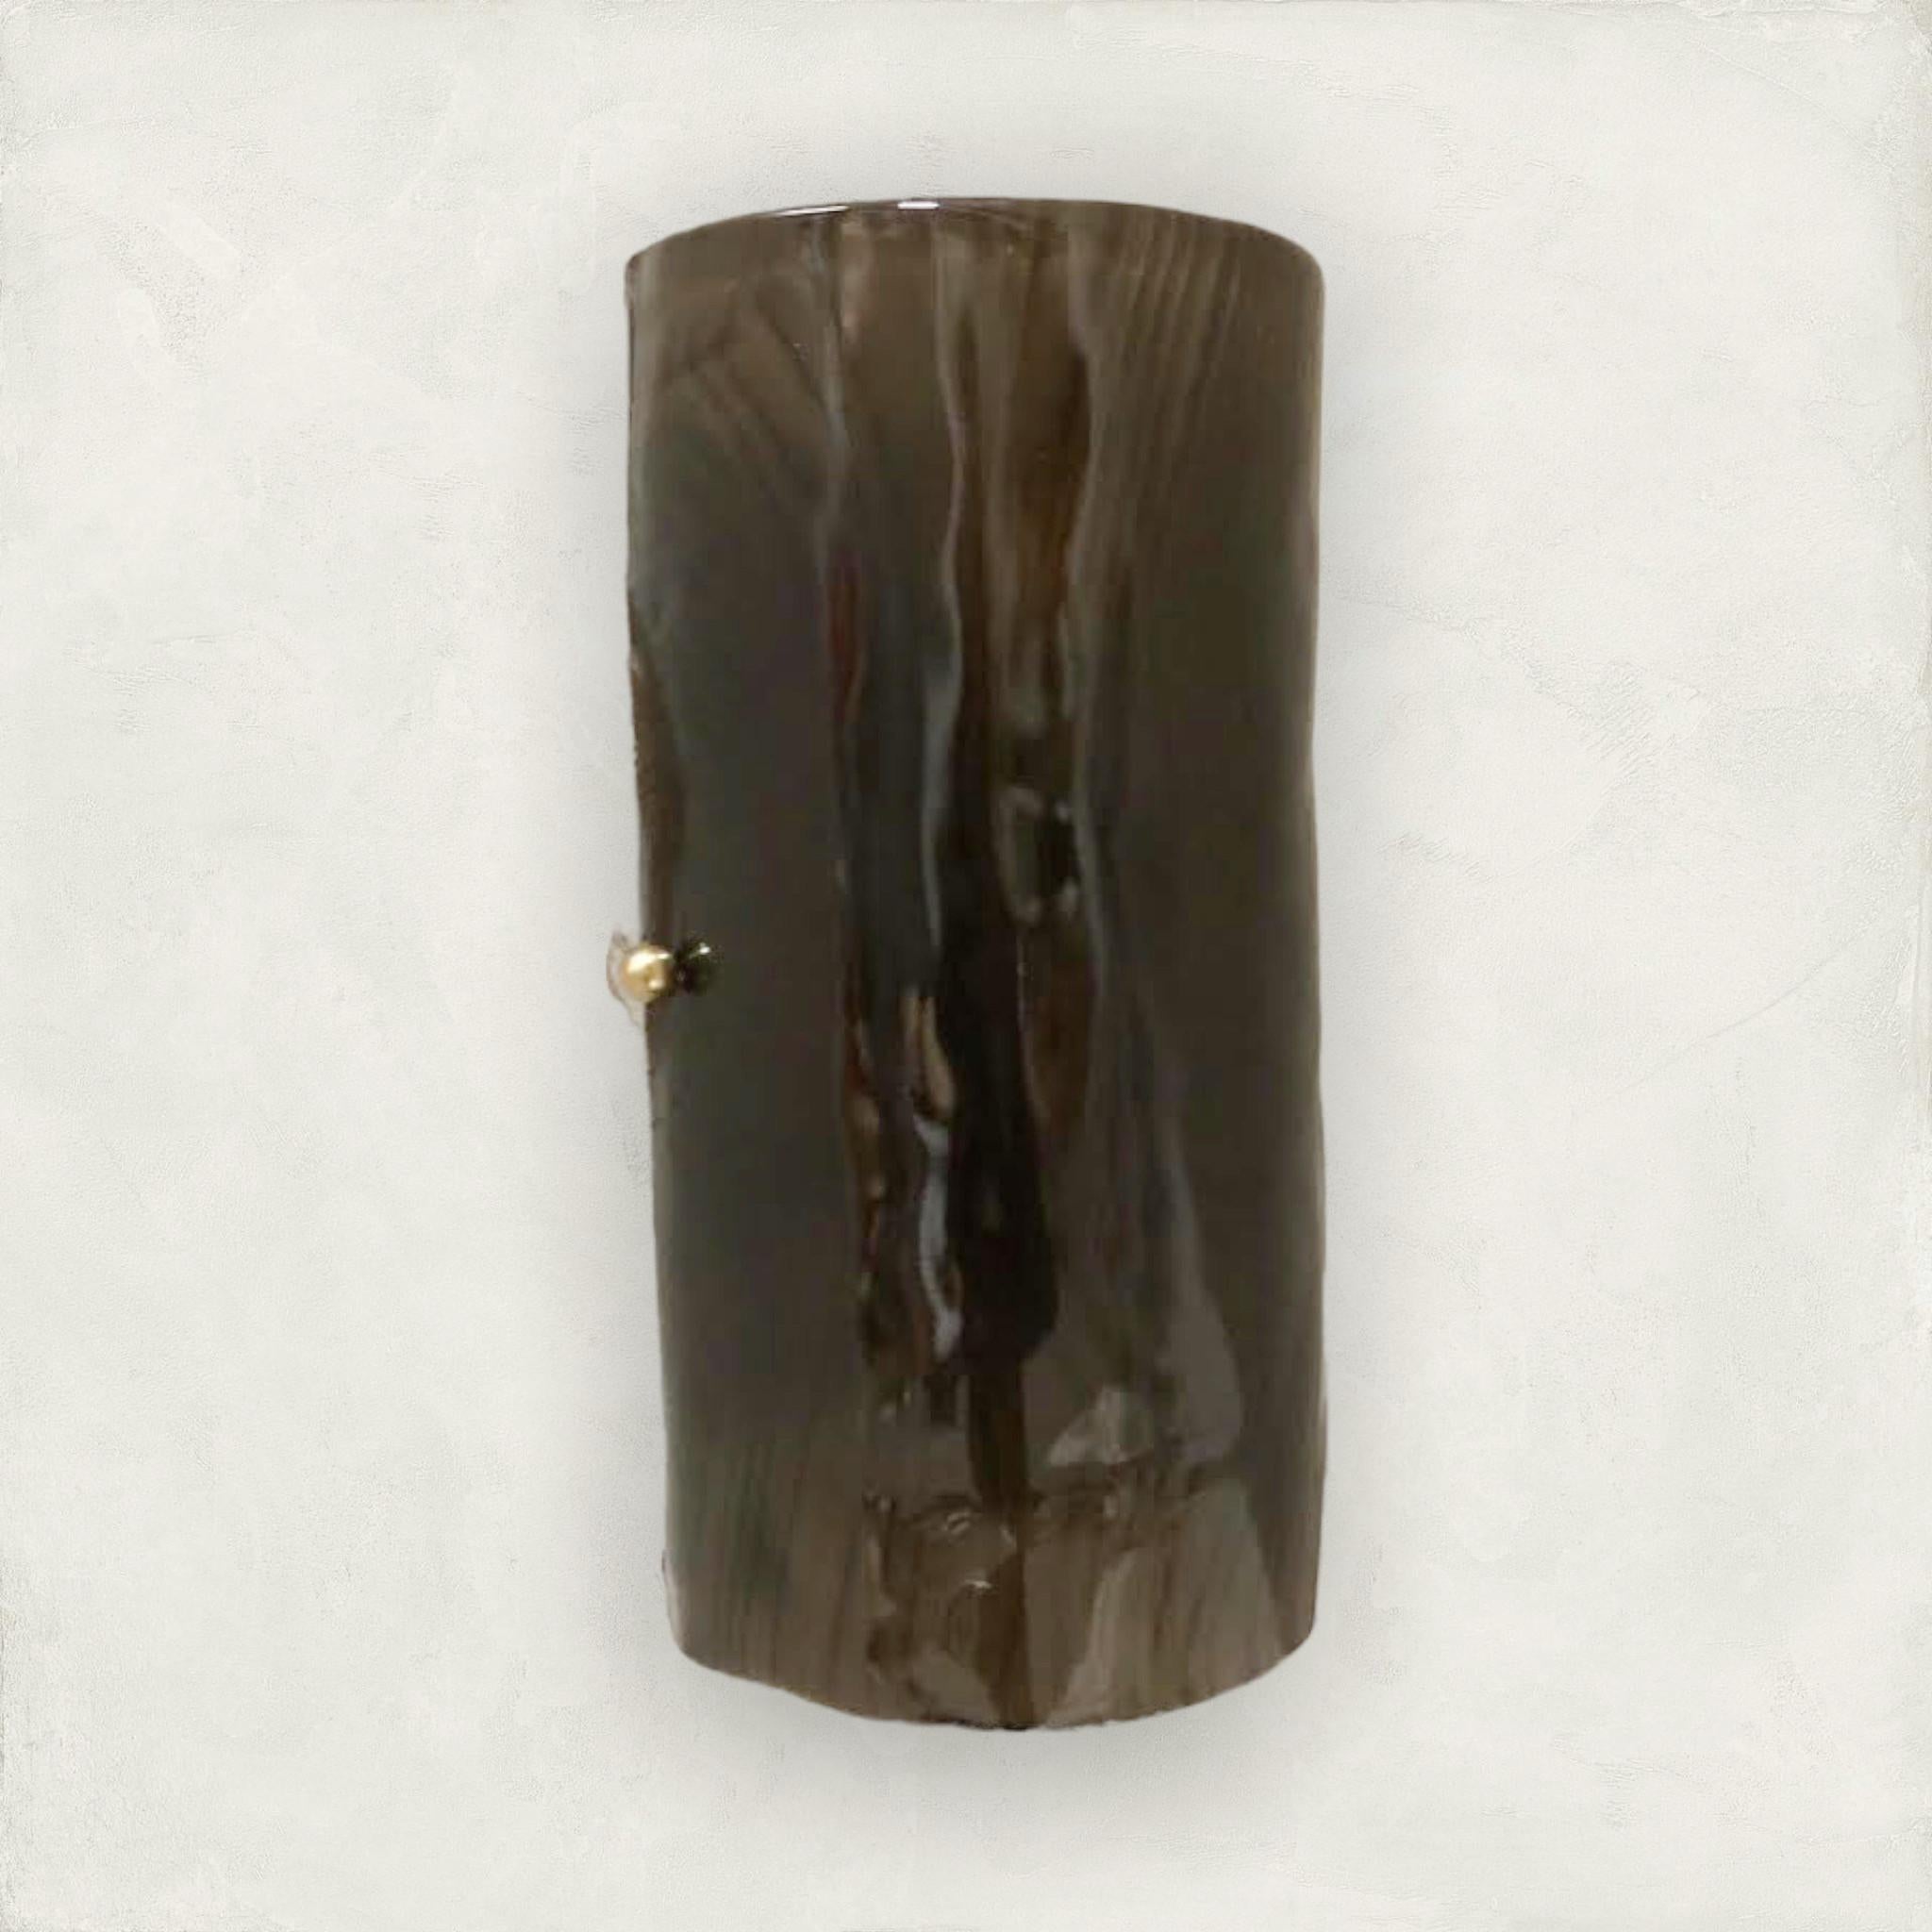 Italian wall light with smoky brown Murano glass hand blown into cylinder shaped diffuser with textured patterns, mounted on full brass back-plate / designed by Fabio Bergomi for Fabio Ltd / Made in Italy
2 lights / E12 or E14 type / max 40W